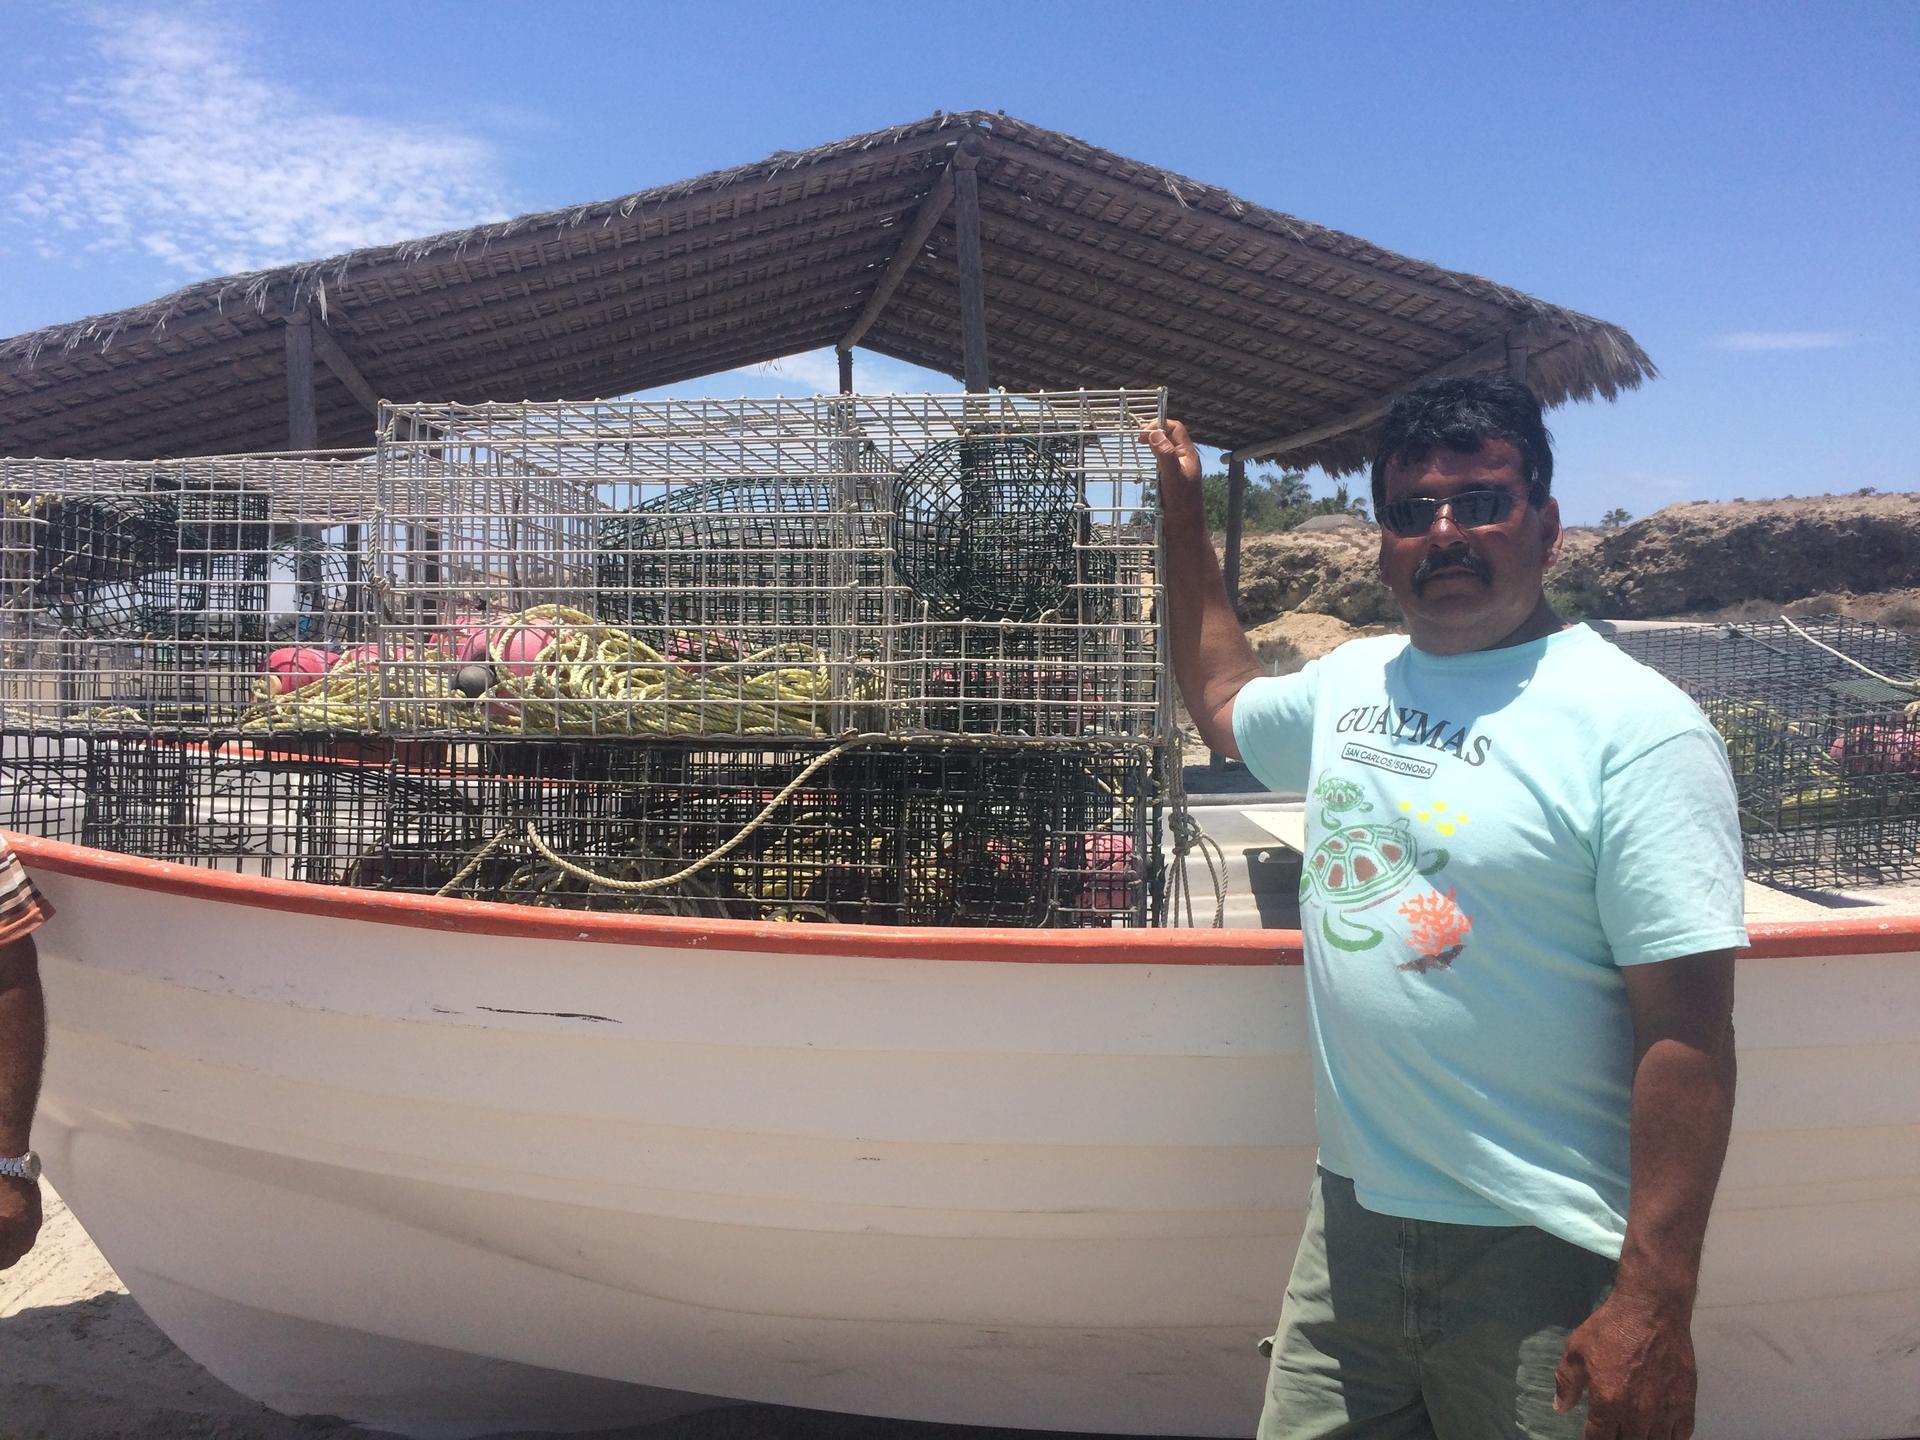 Fisherman Juan Luis Aguilar stands by his boat full of lobster traps and nets on the beach at San Juanico. He and other members of the local fishing cooperative fear the proposed undersea phosphate mine will put them out of business.